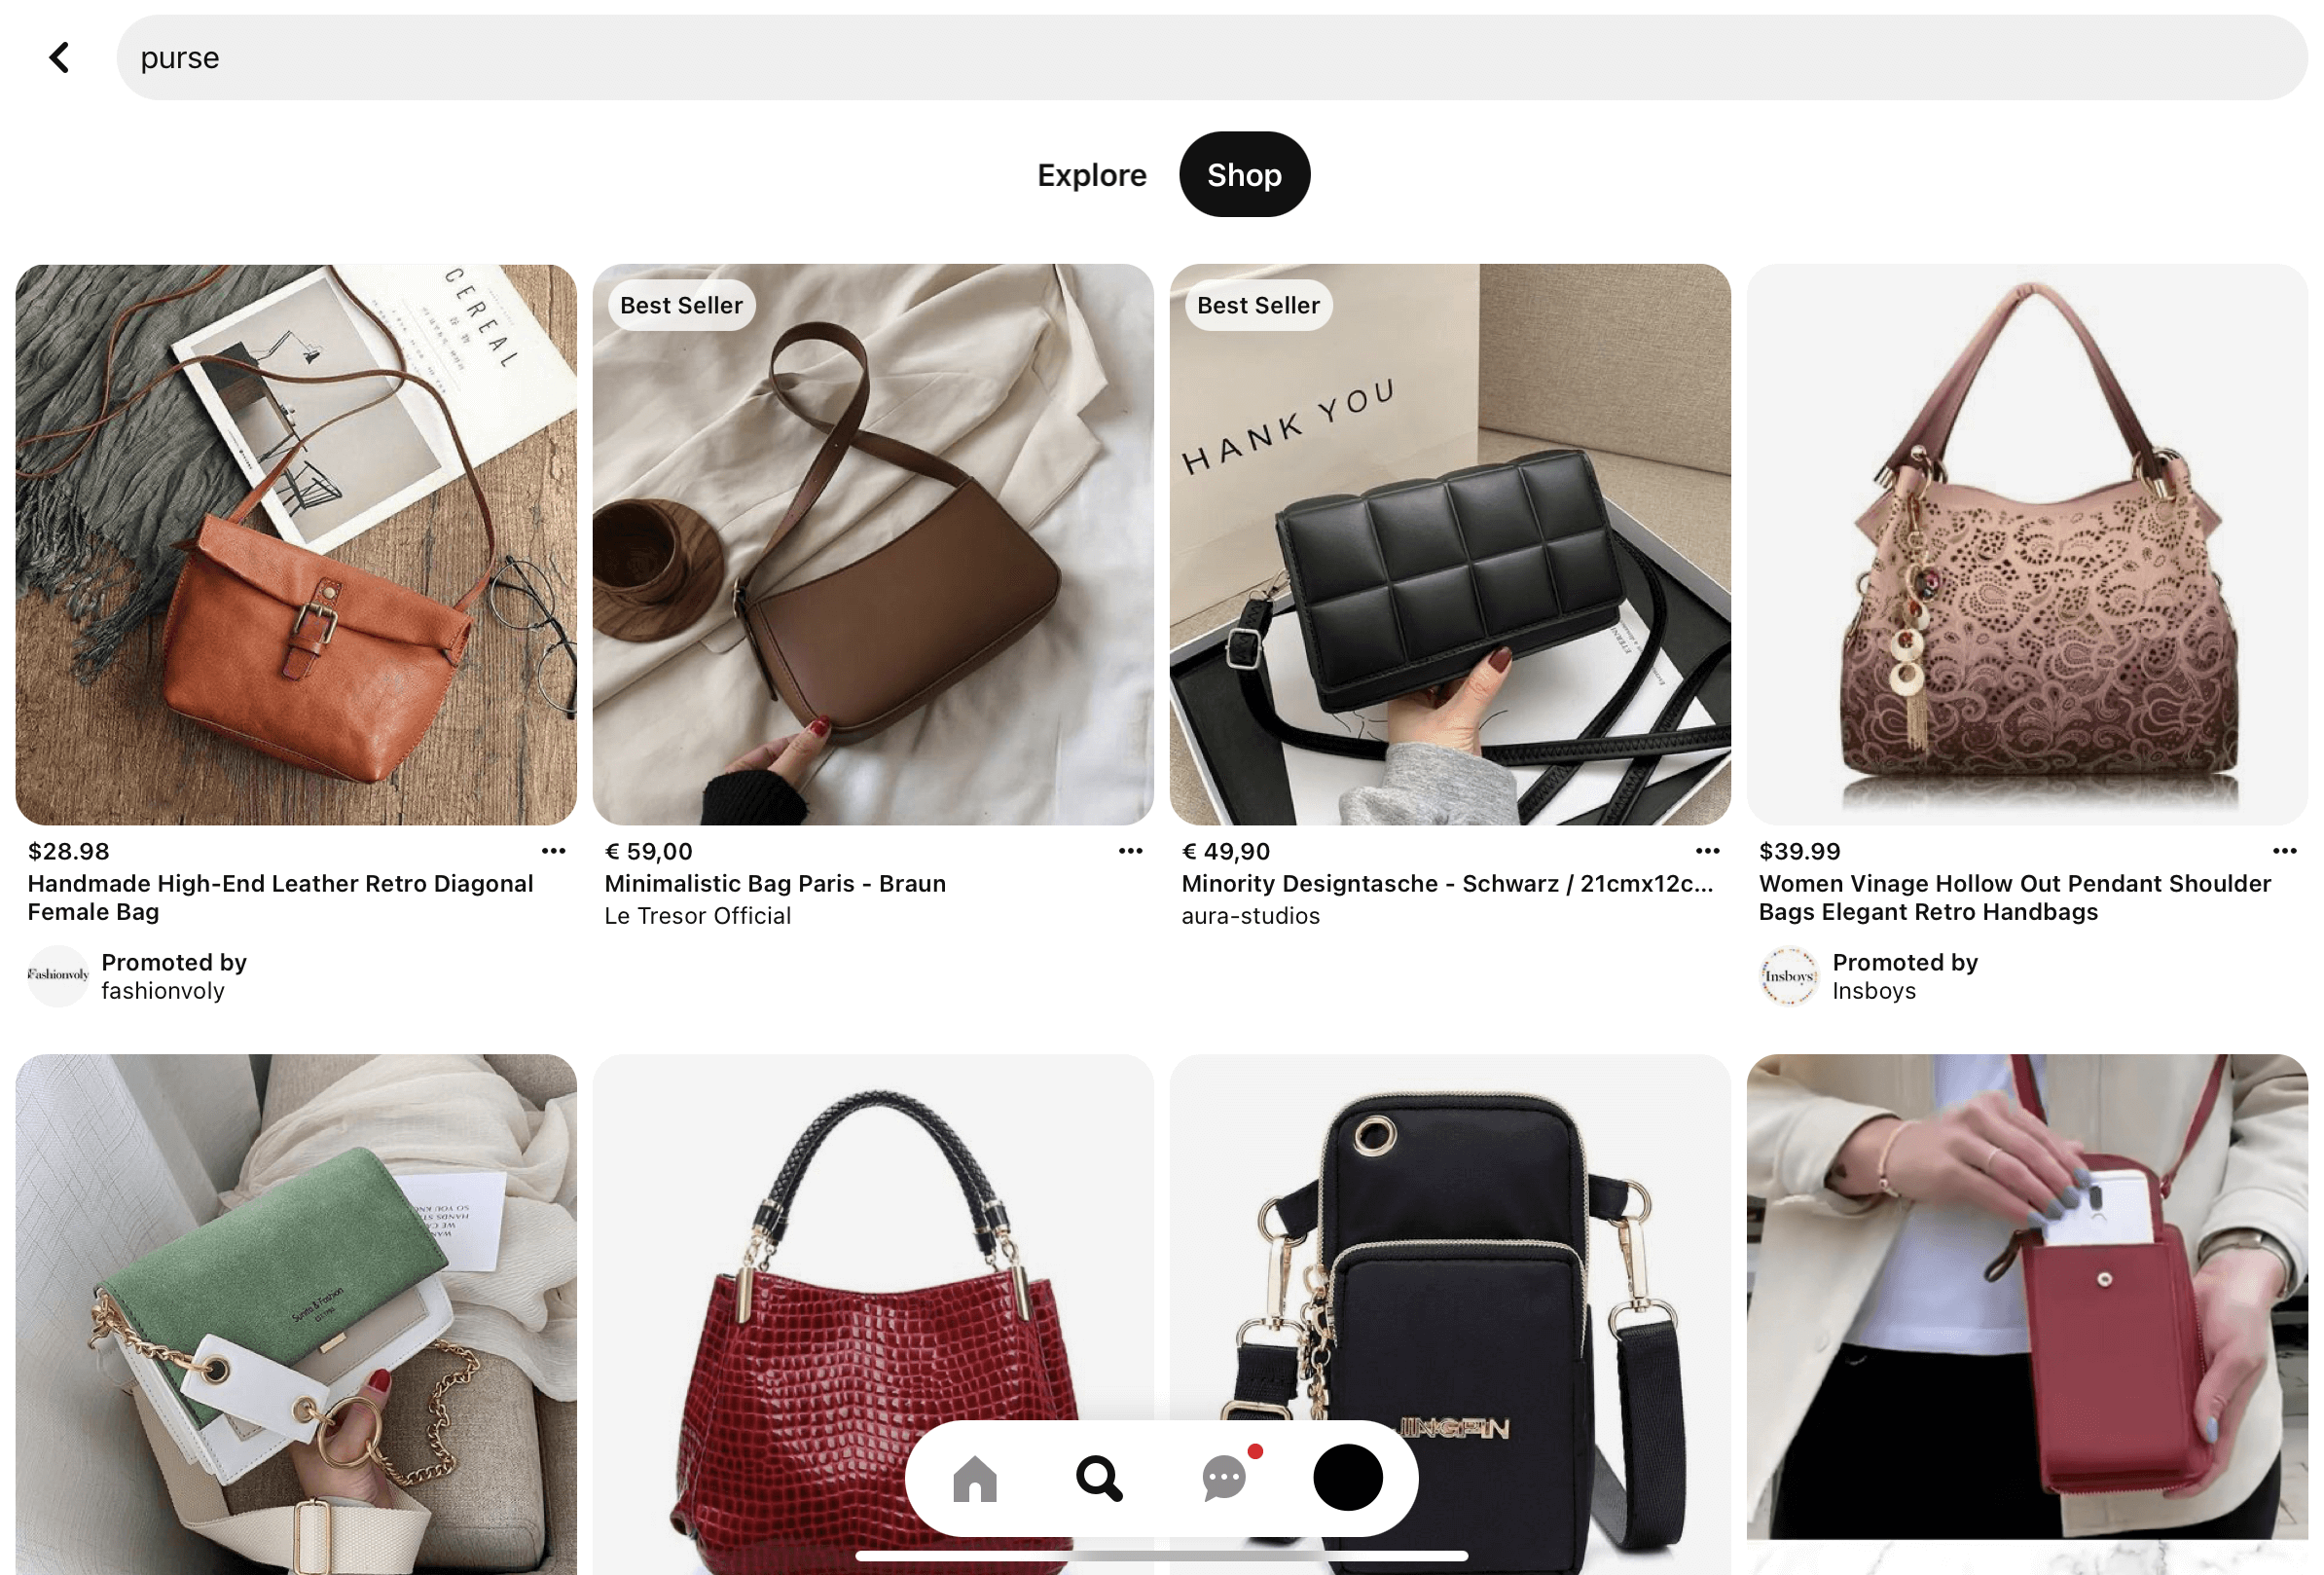 Screenshot of Pinterest app with search query “purse”